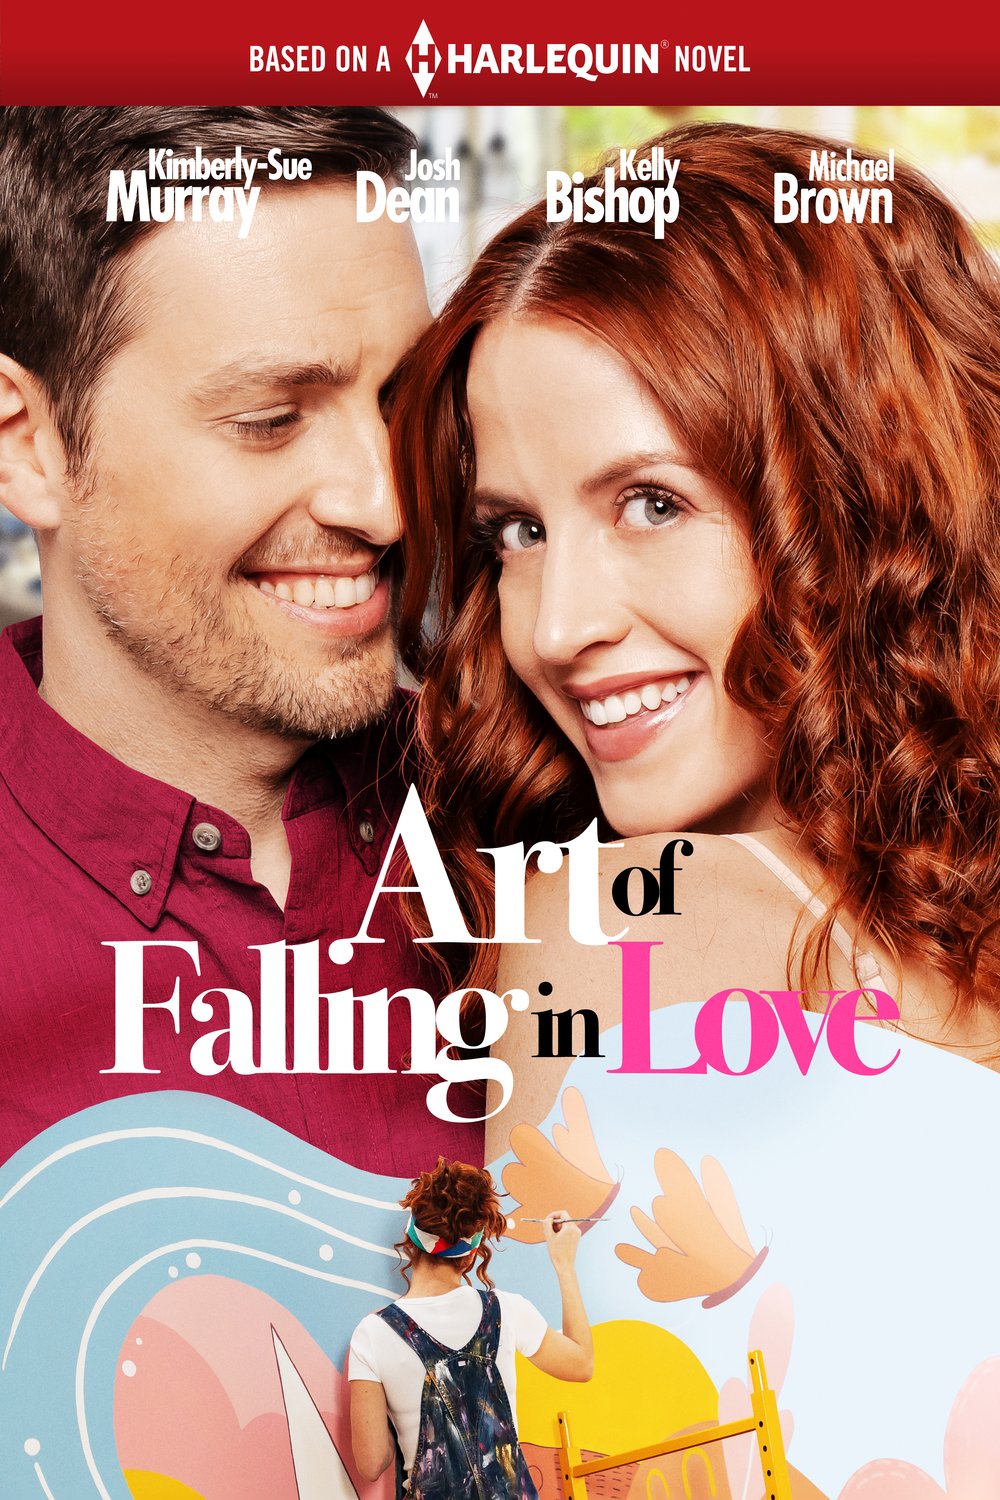 Poster of the movie Art of Falling in Love